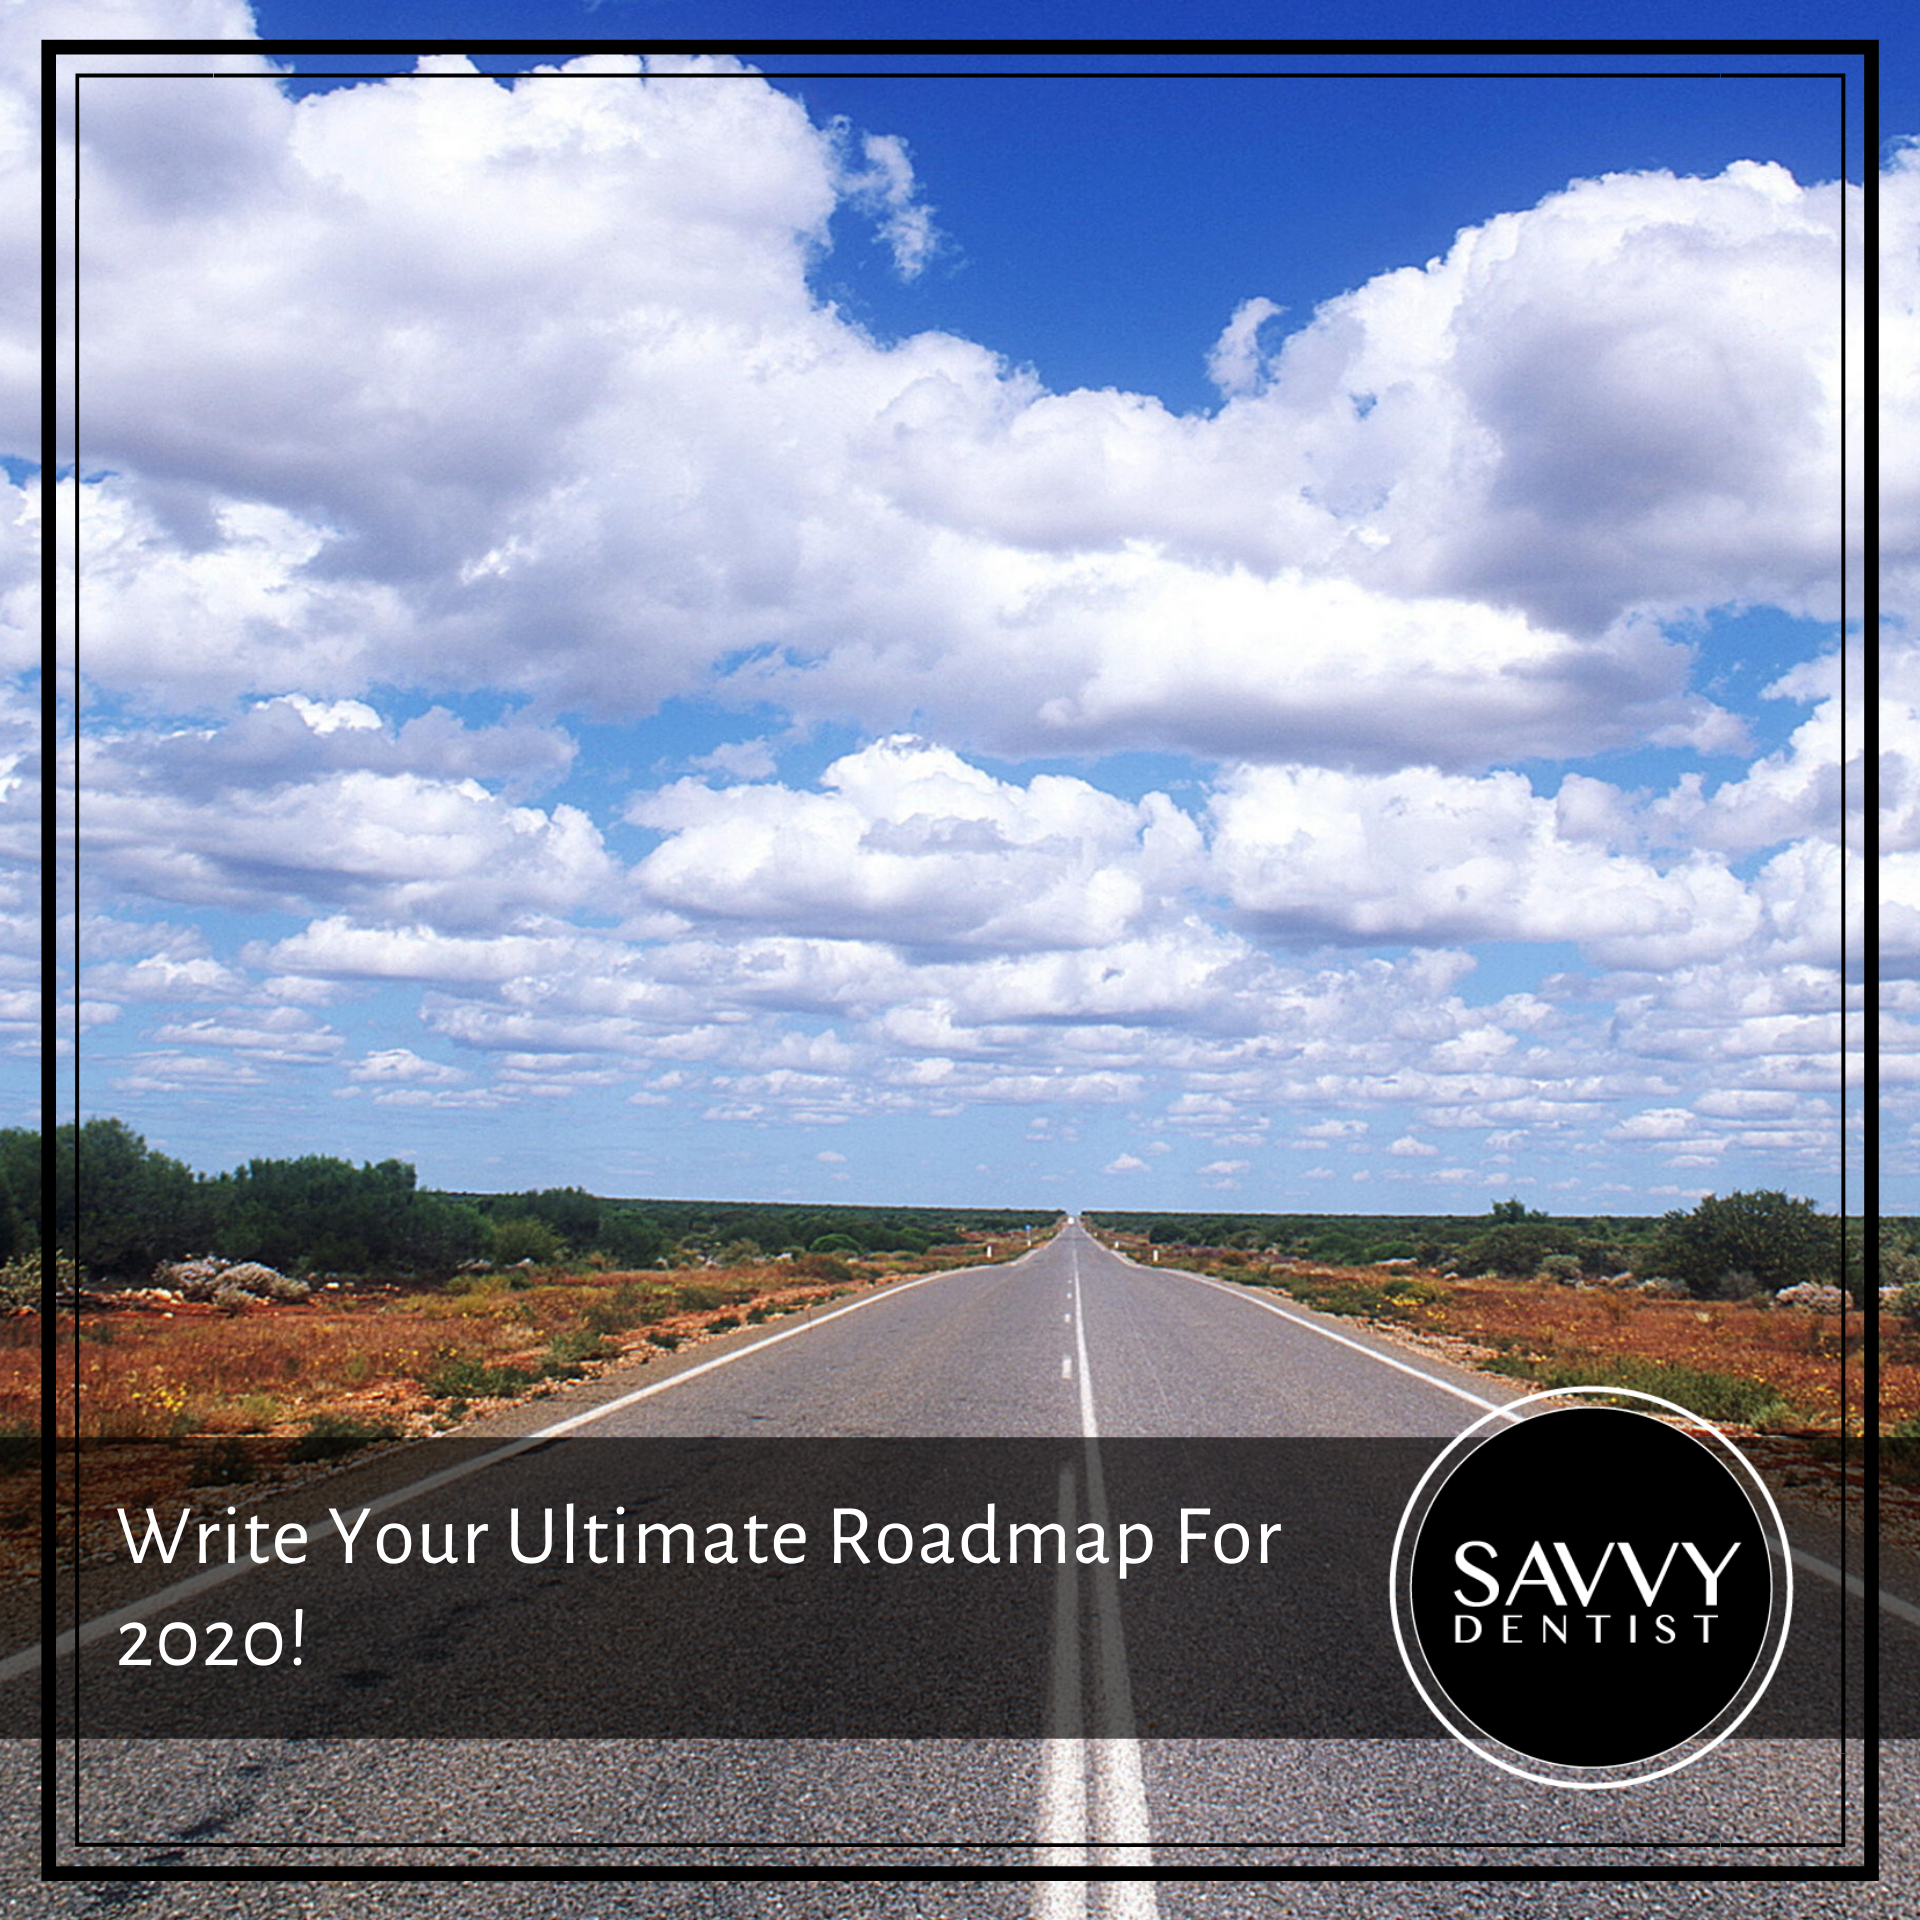 Write Your Ultimate Roadmap For 2020!